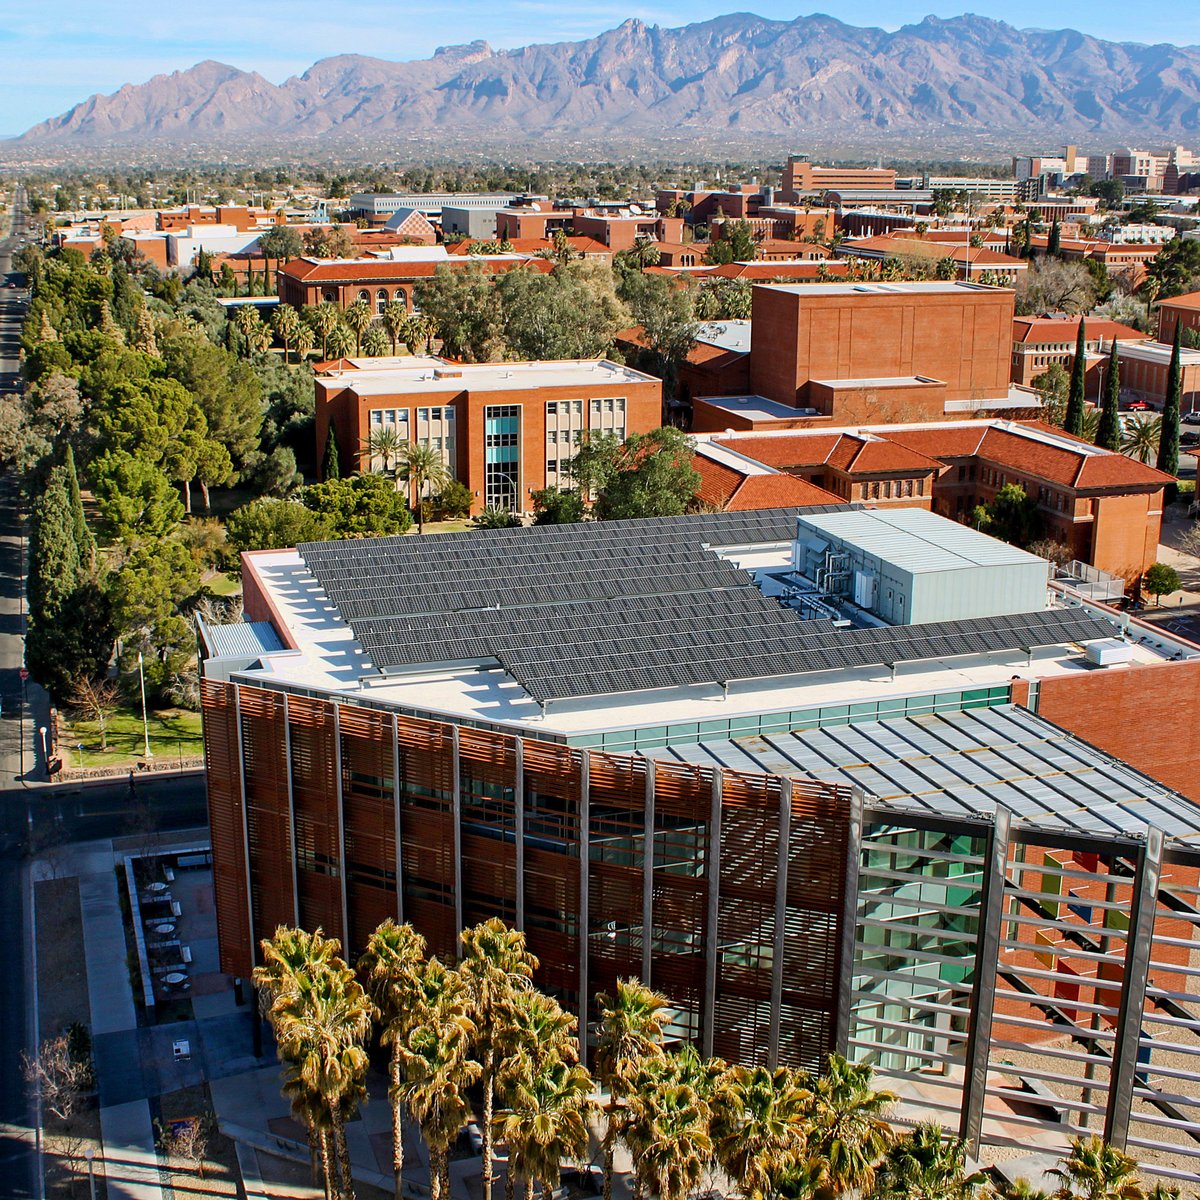 Explore the University of Arizona through a visit to campus! Learn about tour options bit.ly/3KUa2PT